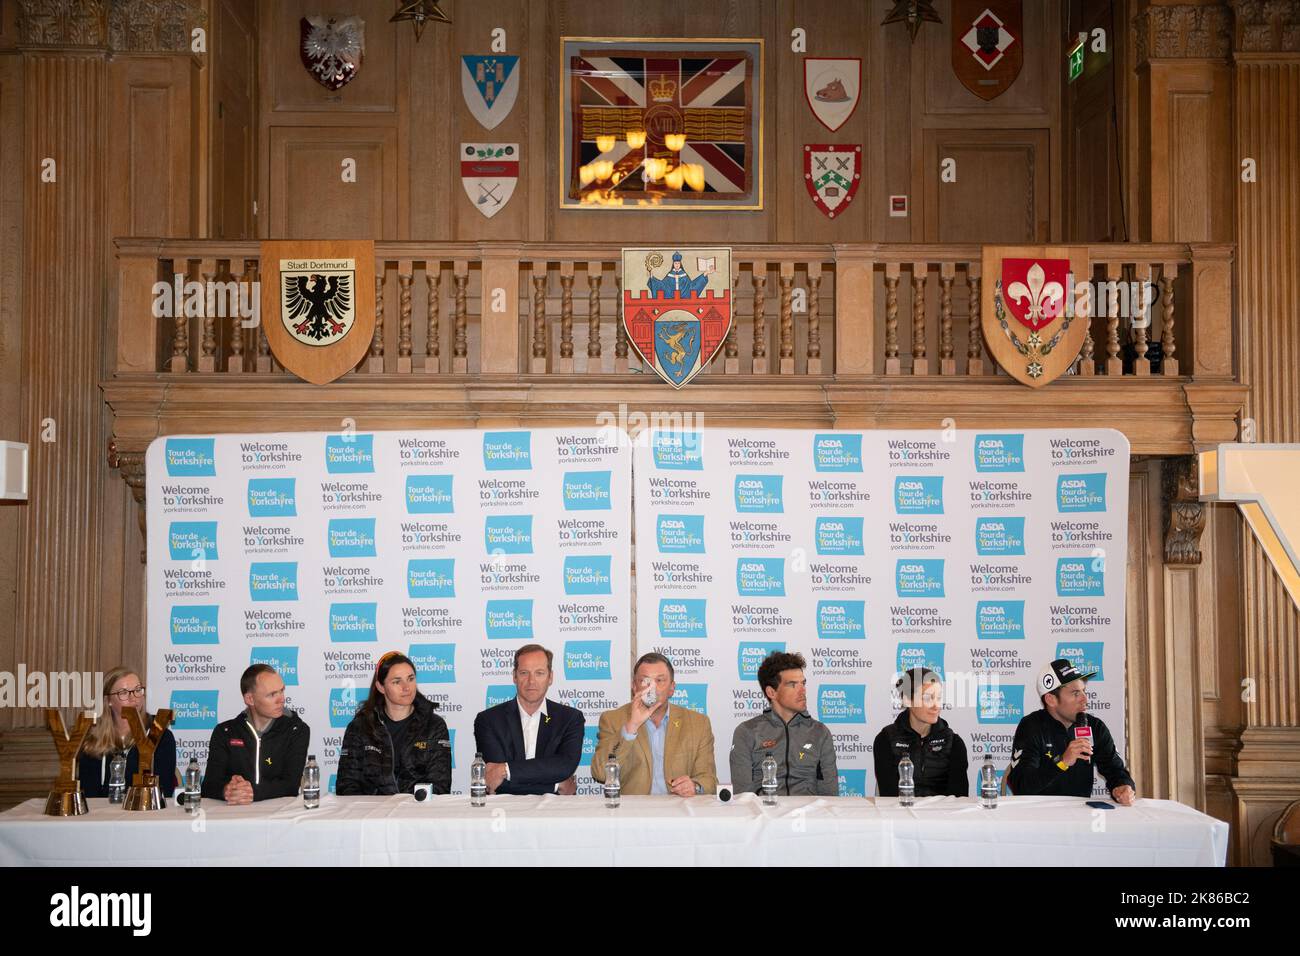 Mark cavendish, Lizzie Deignan, Greg Van Avermaet, Christian Prudhmme, Dame Sarah Storey, Chris Froome, Gabriella Shaw in the Tour de Yorkshire 2019 Press conference and presentation on the in Leeds city Centre Stock Photo